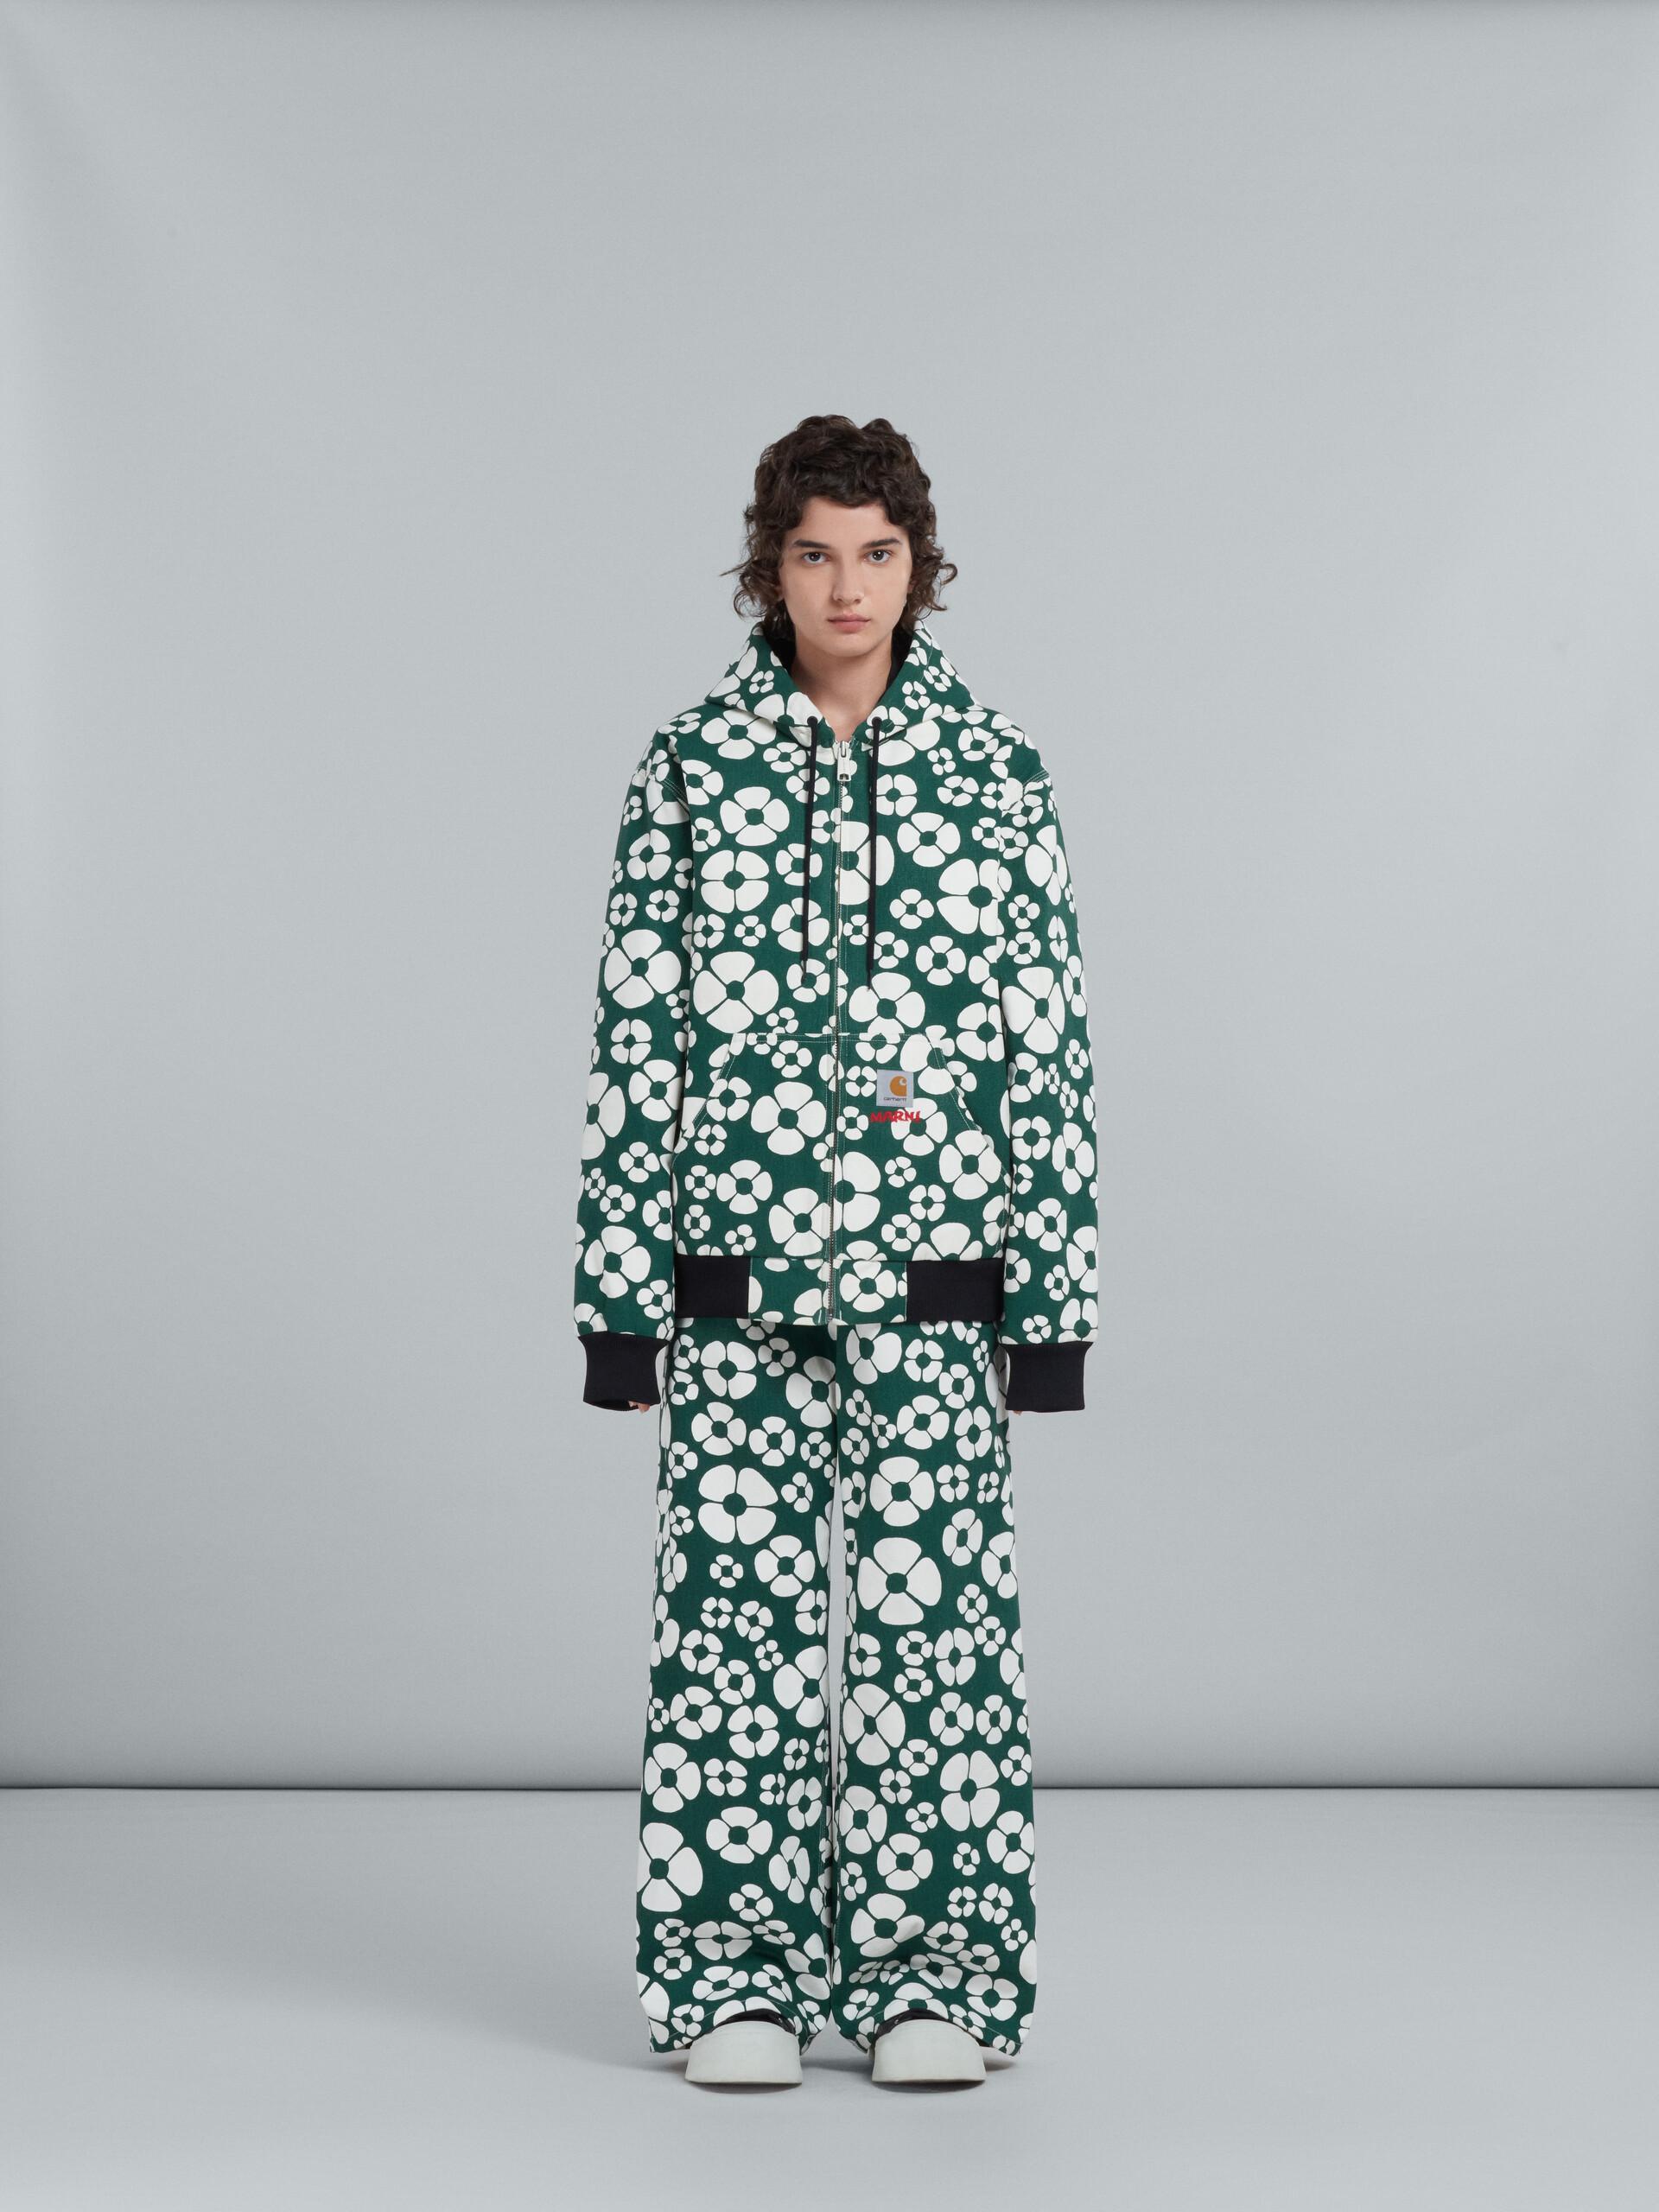 MARNI x CARHARTT WIP - green floral trousers - Pants - Image 2